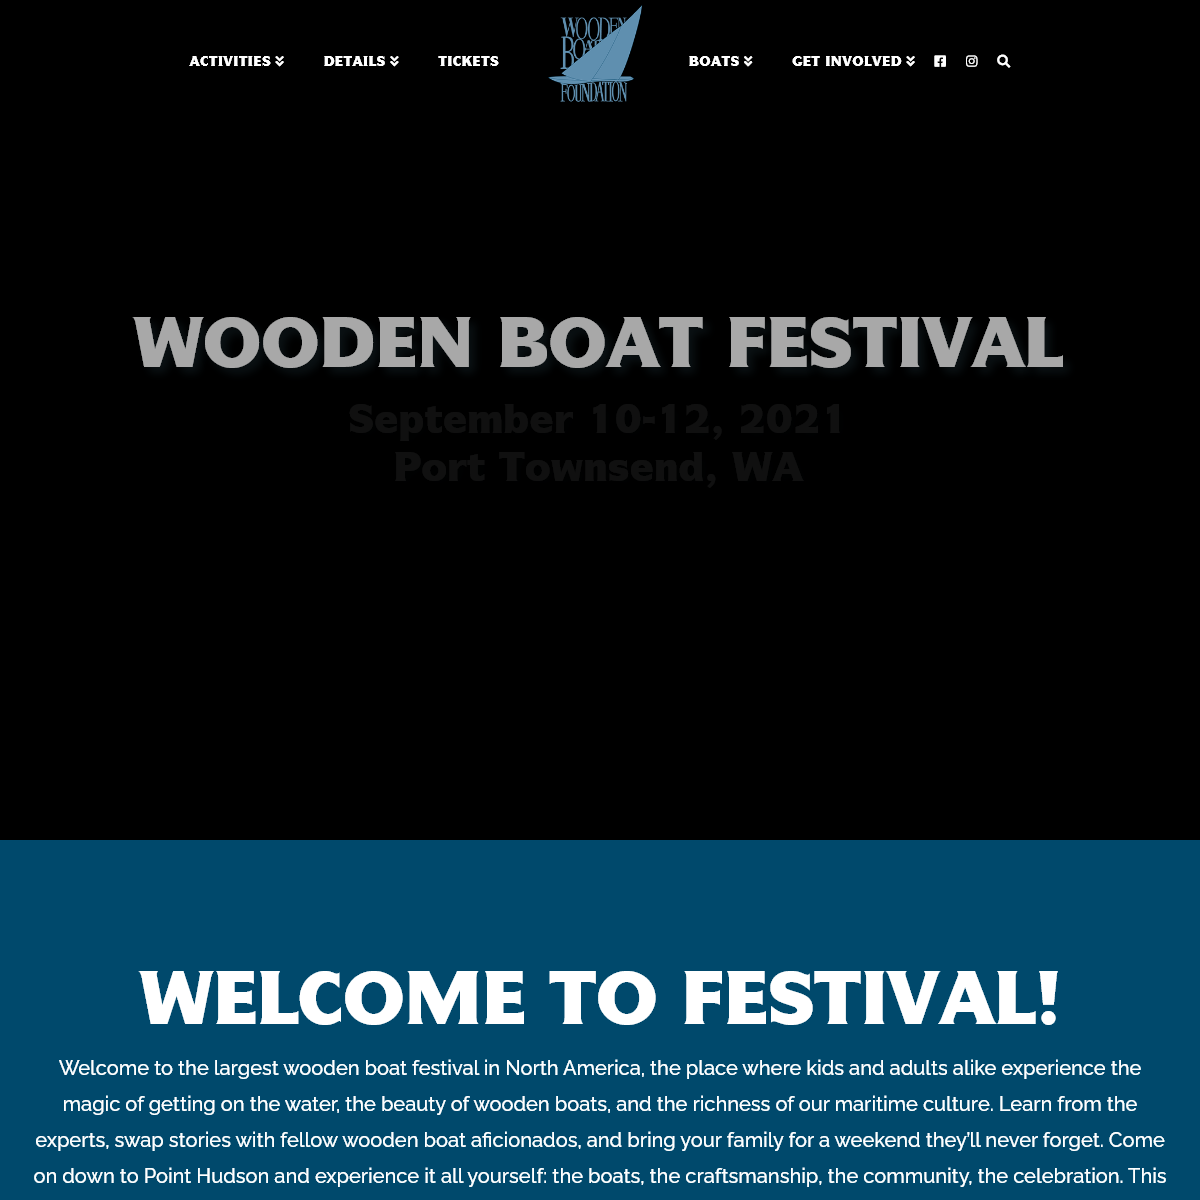 A complete backup of woodenboat.org